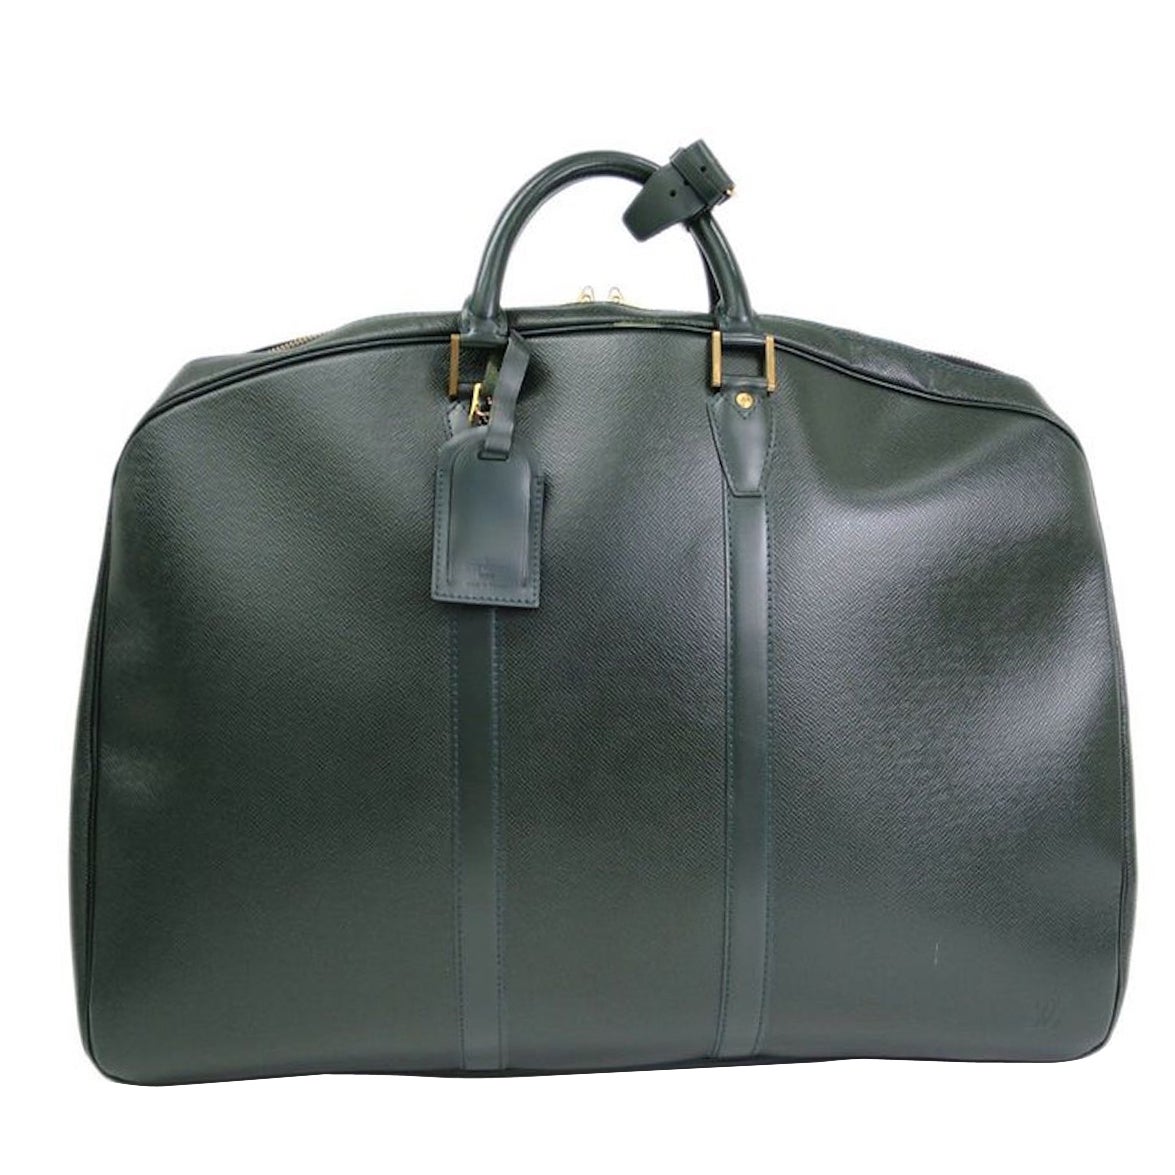 leather duffle bag louis vuittons